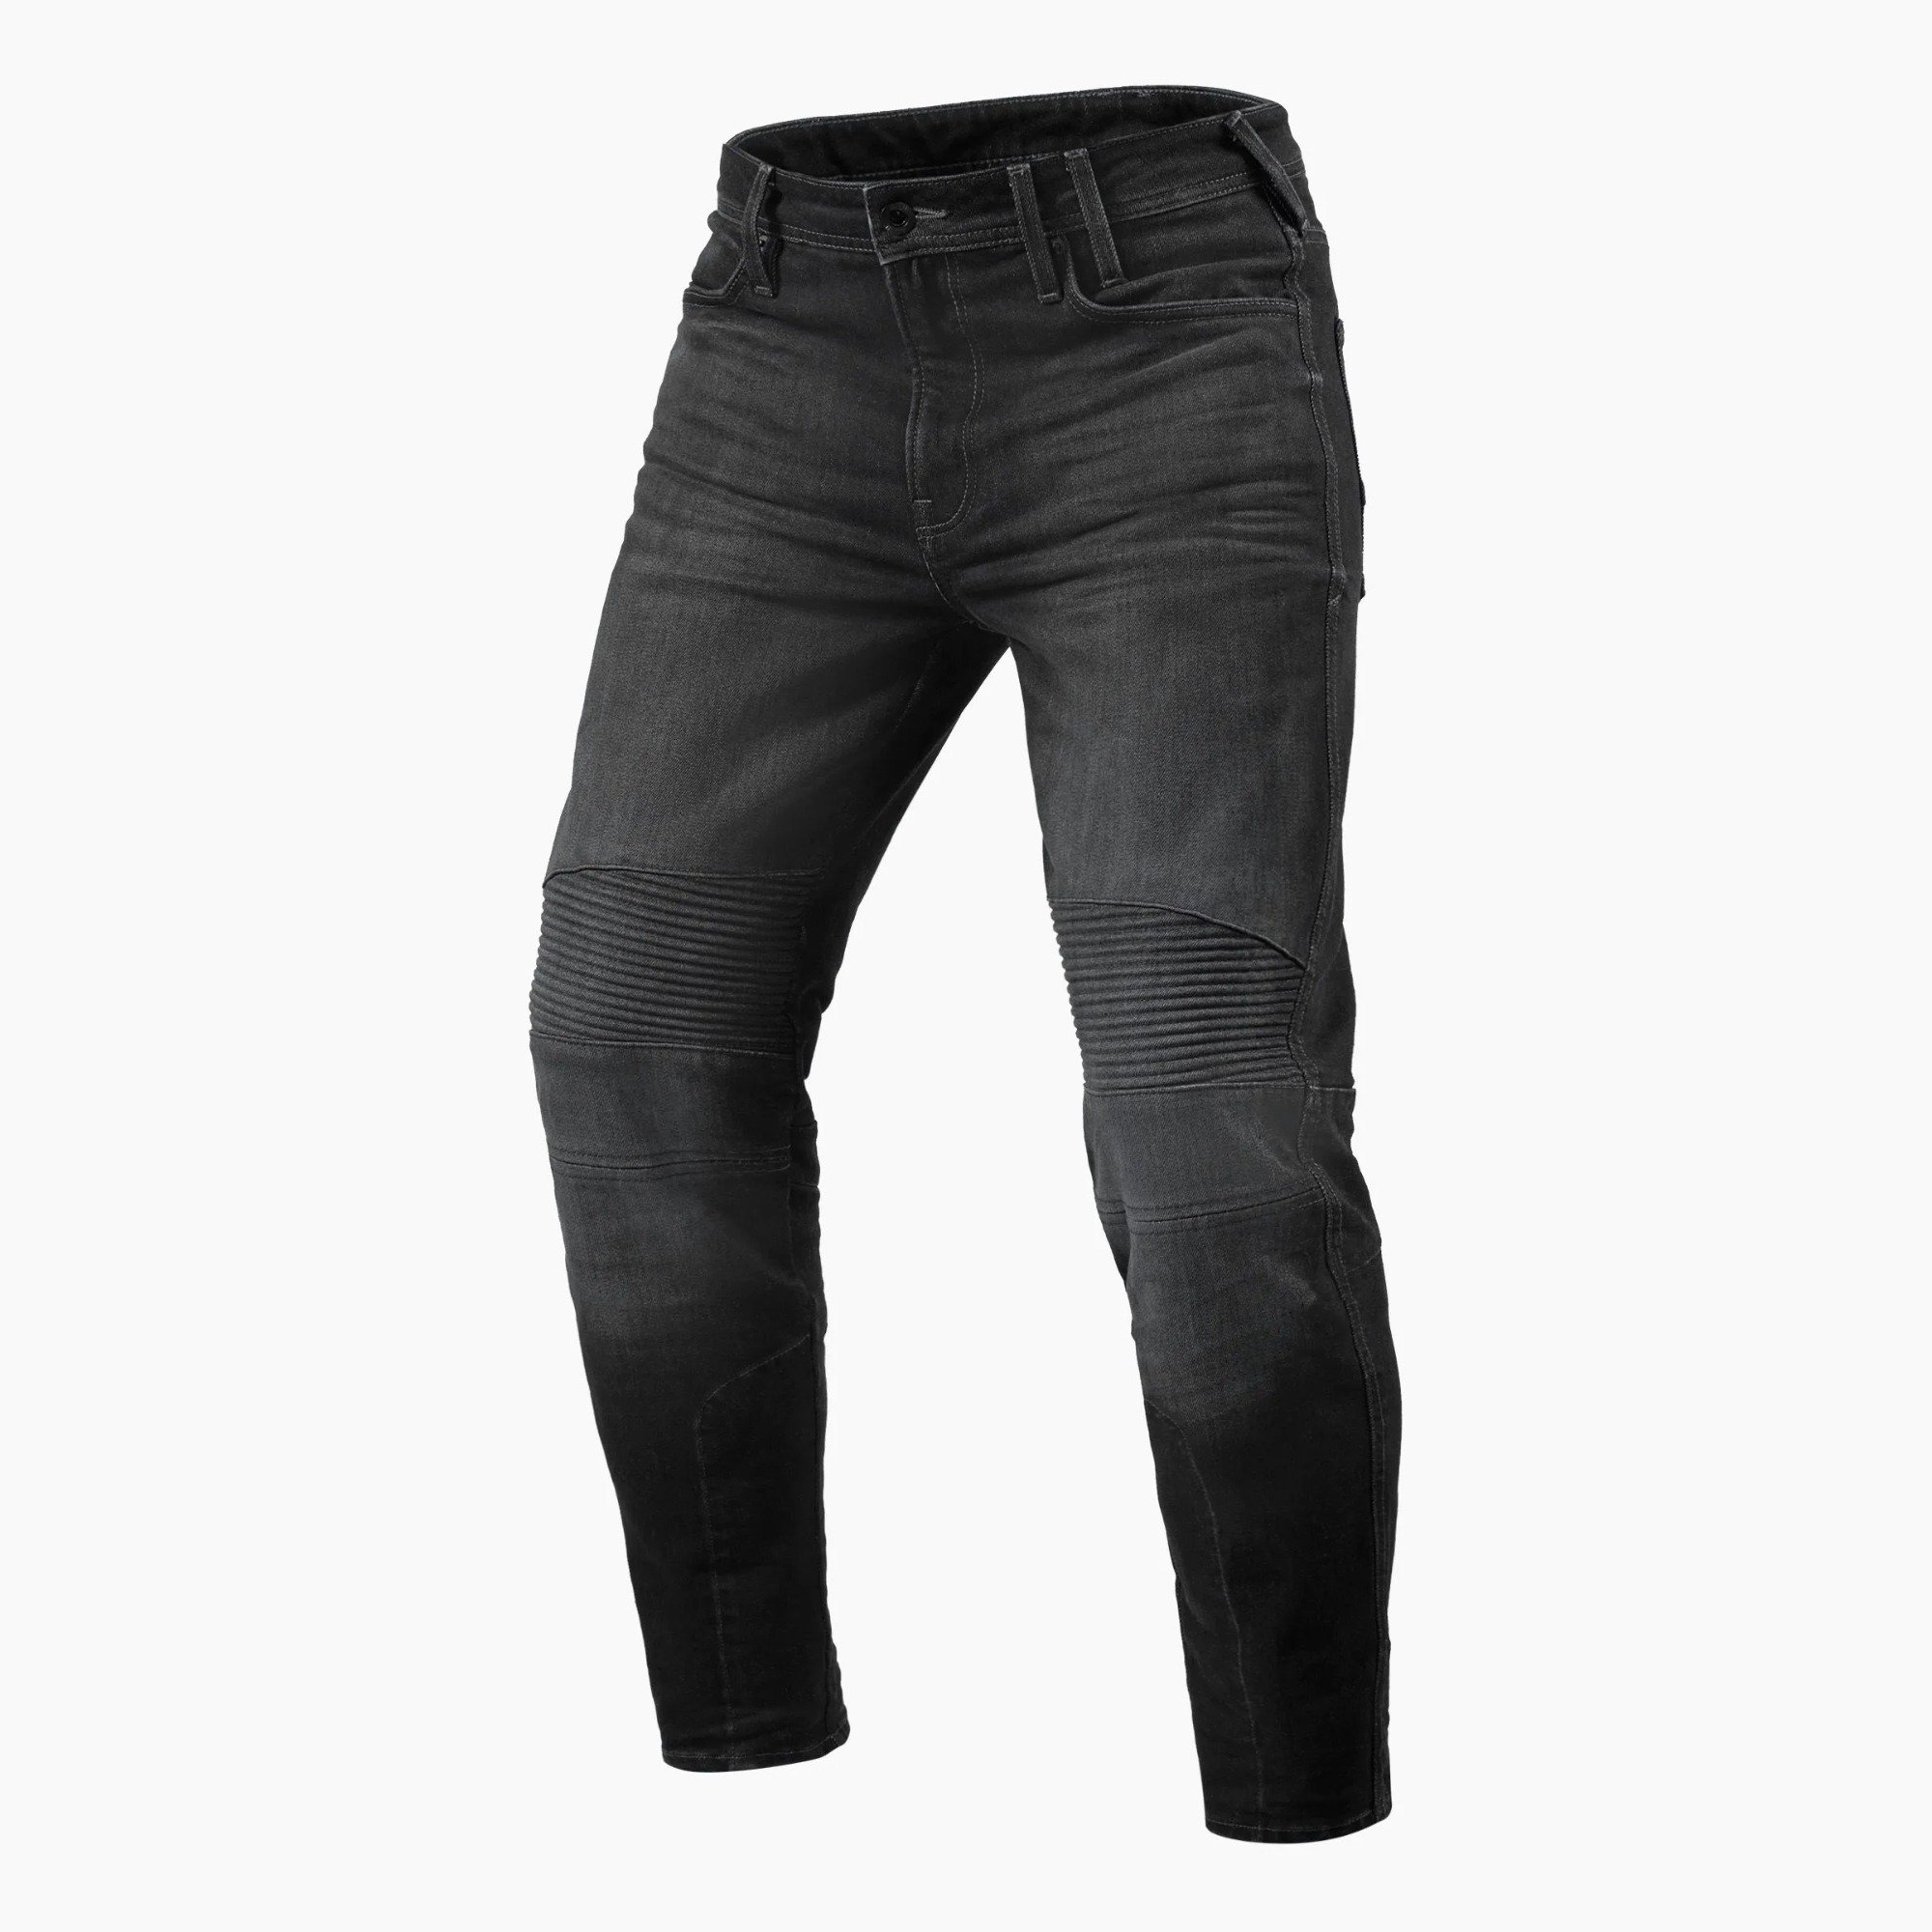 Image of REV'IT! Jeans Moto 2 TF Dark Grey Used Motorcycle Jeans Size L36/W33 ID 8700001337908